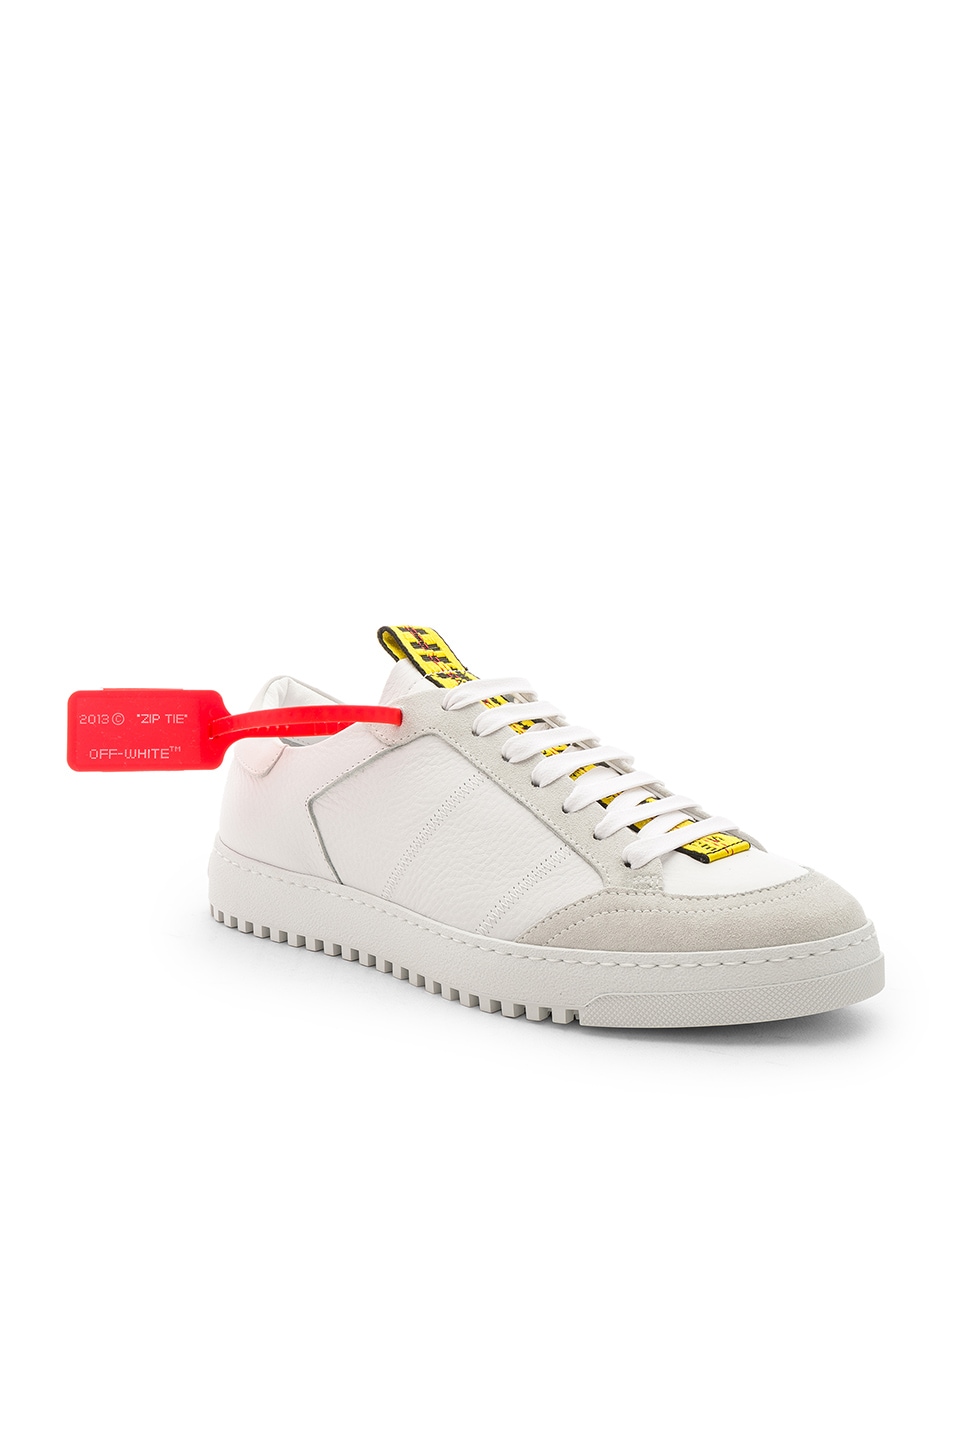 Image 1 of OFF-WHITE Leather Belt Sneakers in White & Yellow